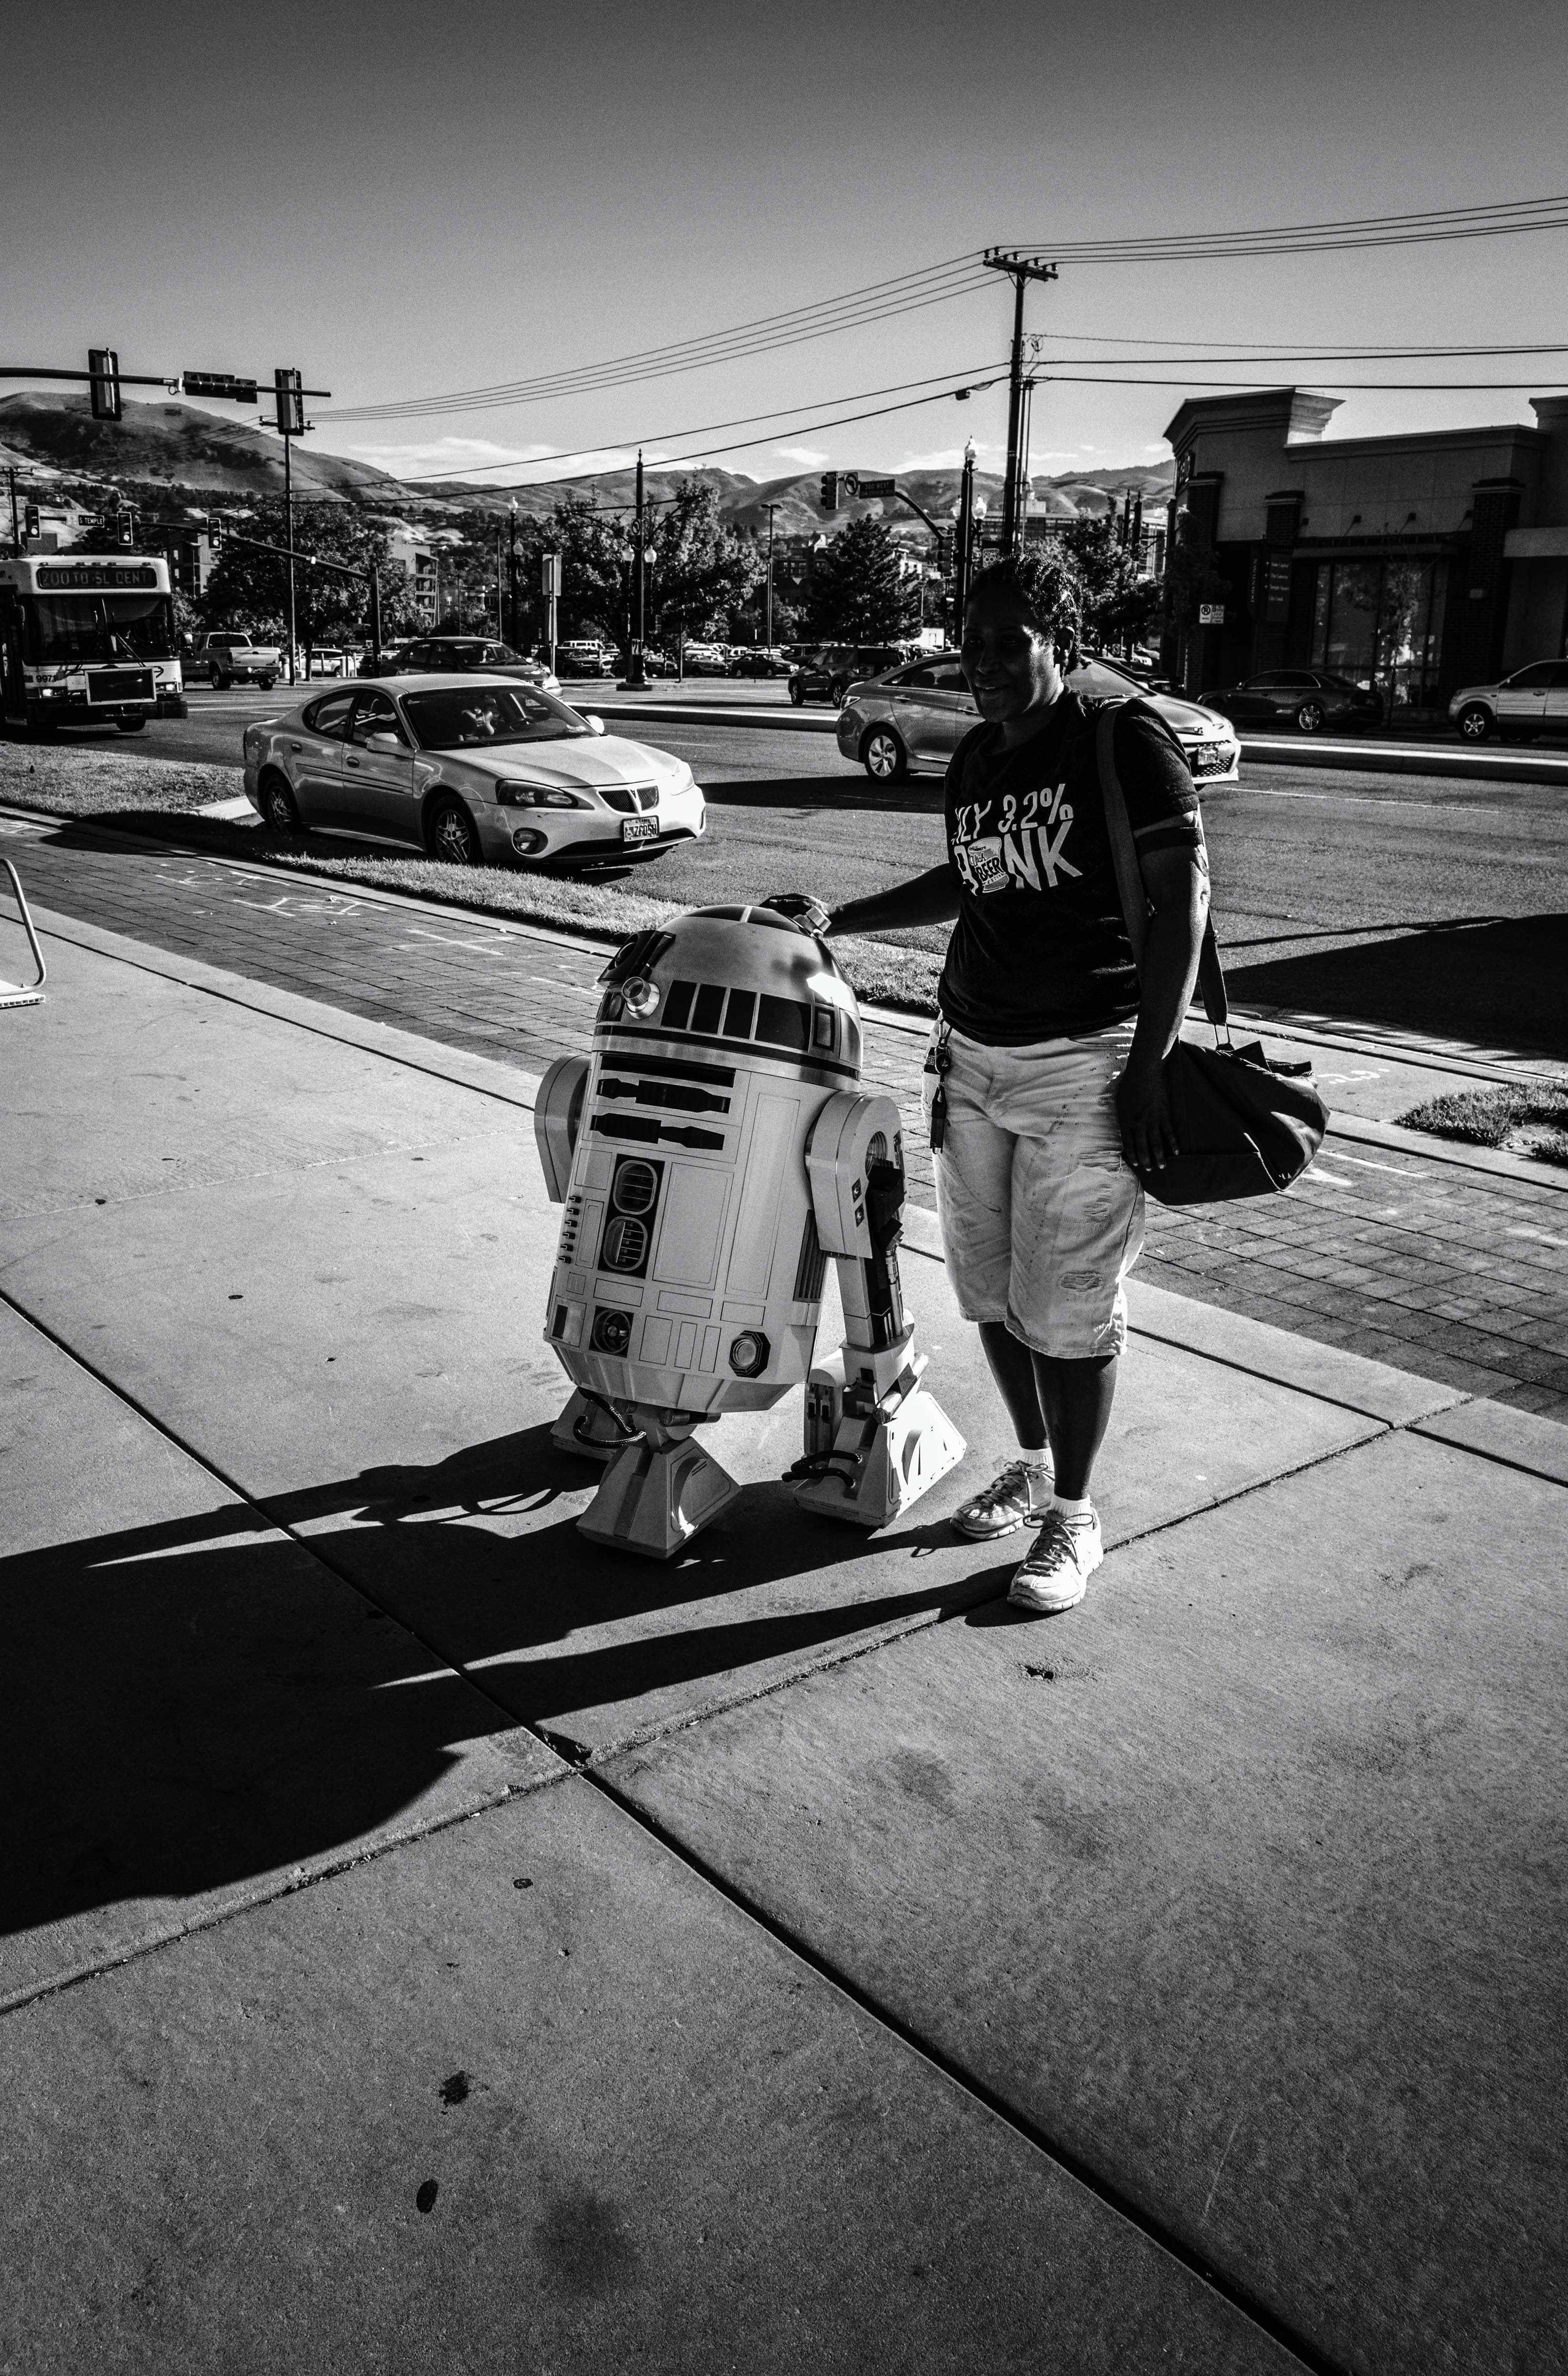 R2D2 and Friend